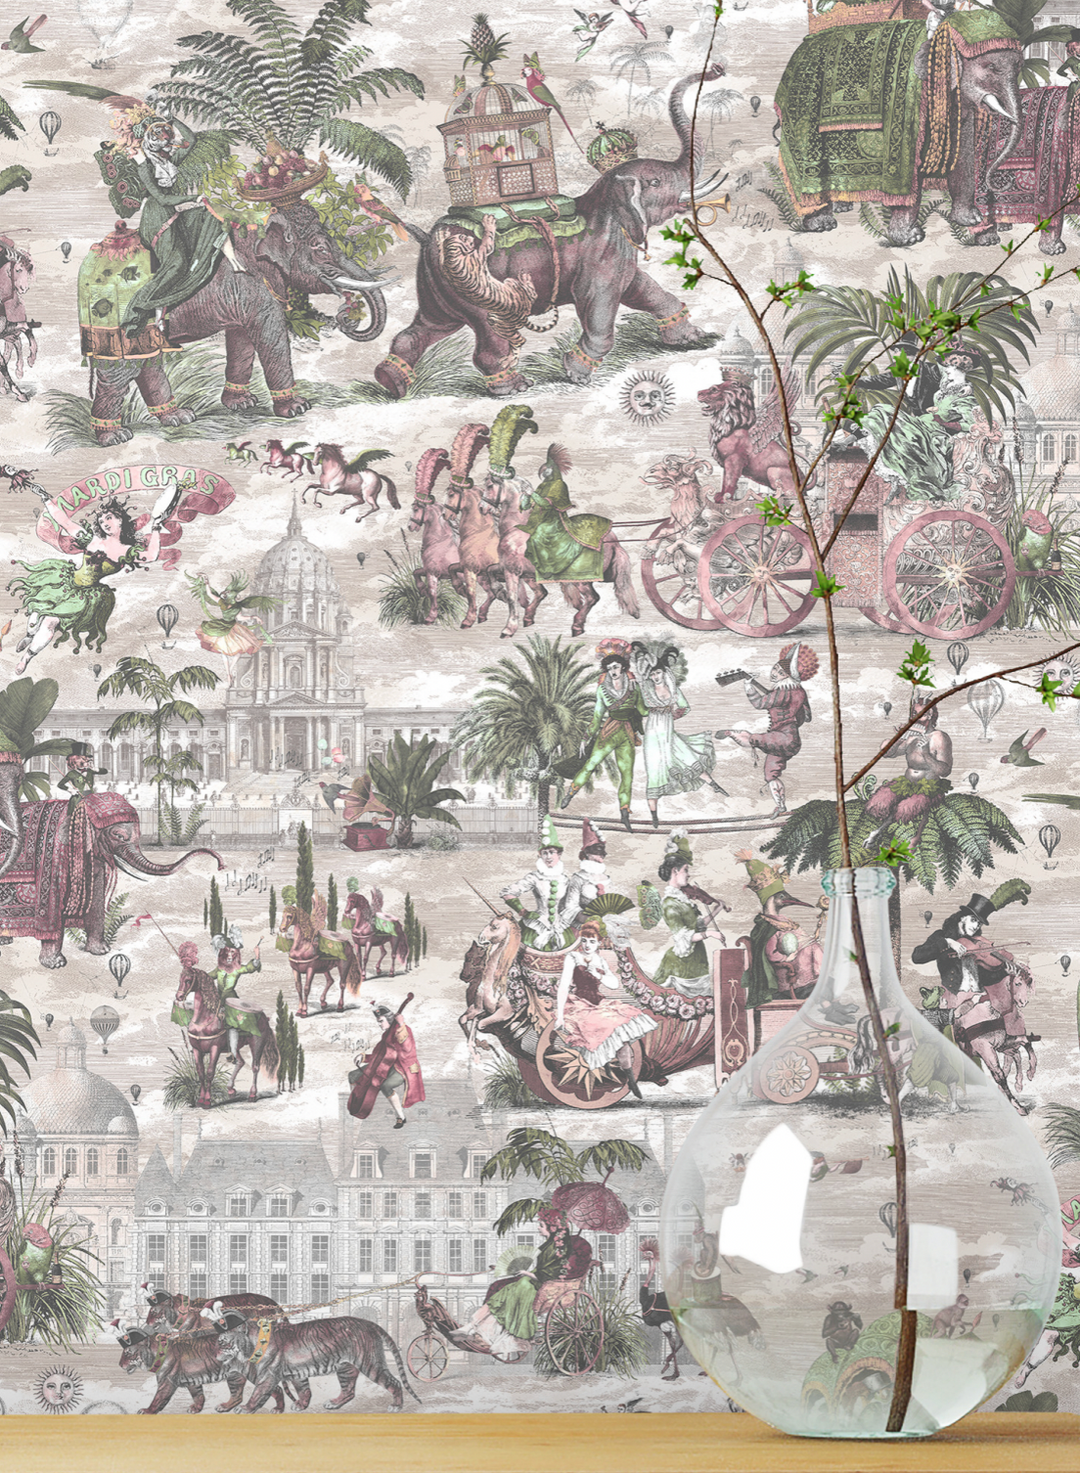 brand-mckenzie-carnival-fever-carnival-march-fiesta-whimsical-classical-wallpaper-wallcovering-rose-forest-pink-green